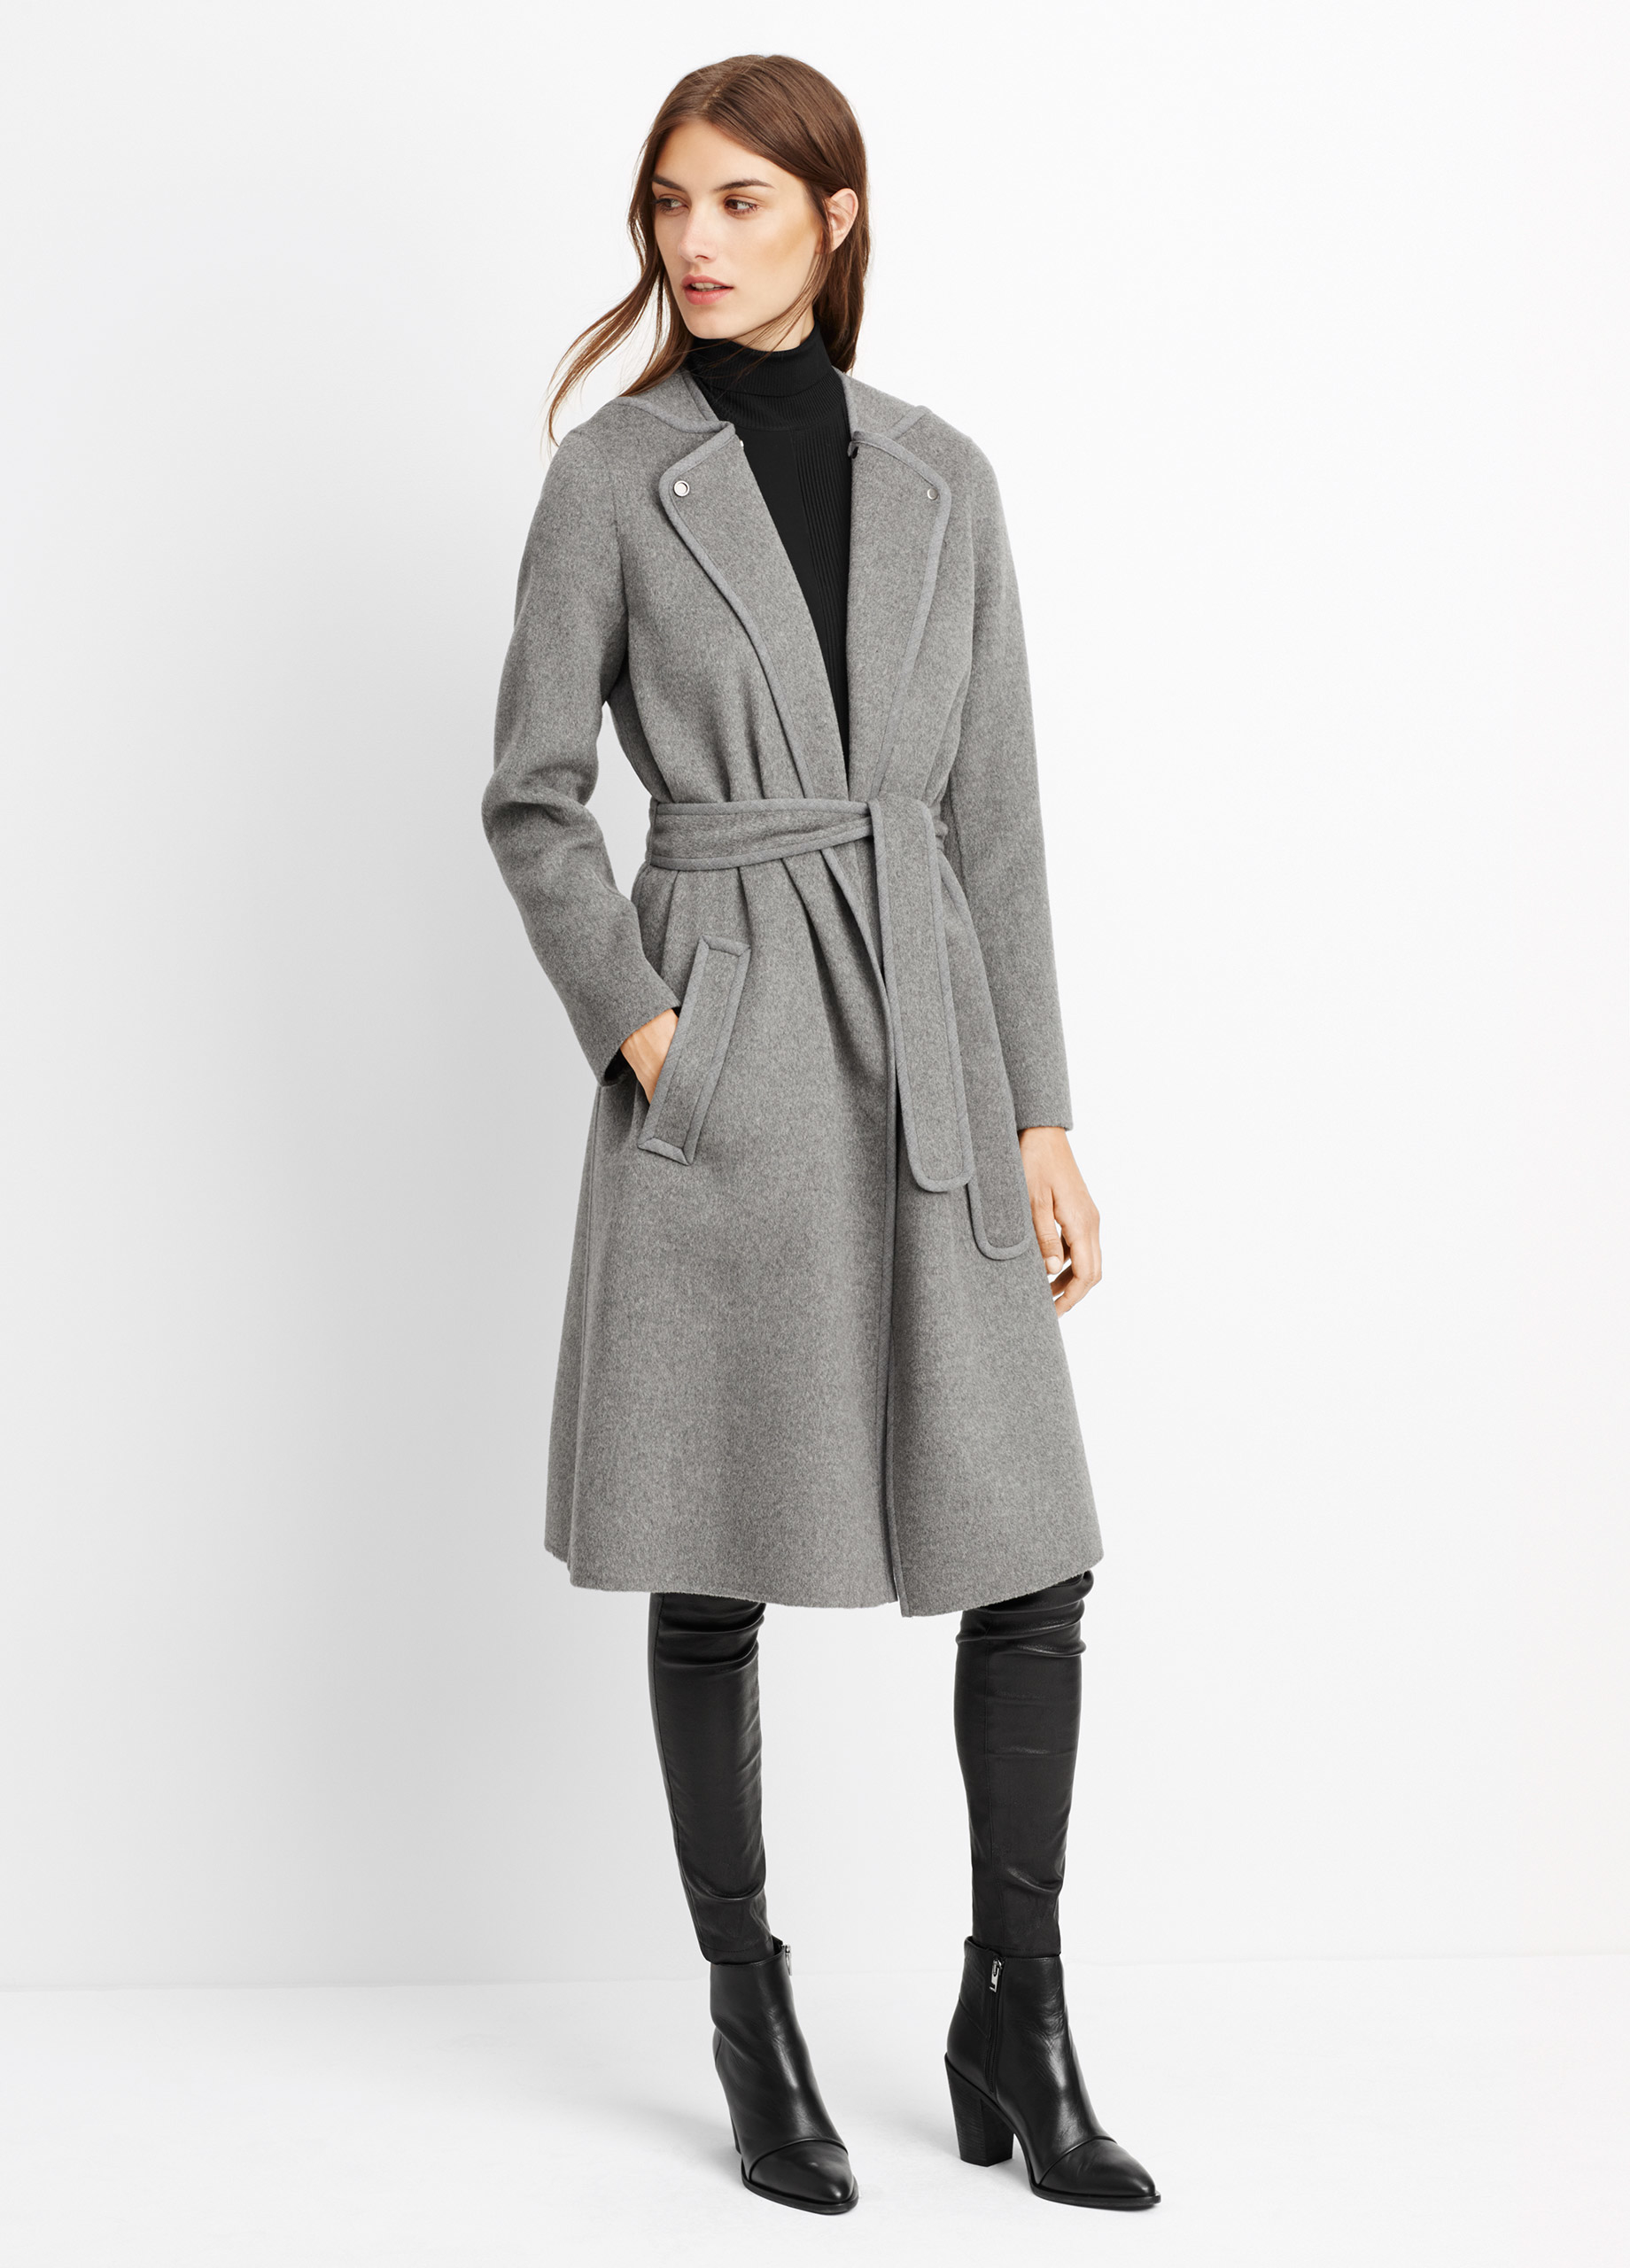 Lyst - Vince Belted Car Coat in Gray